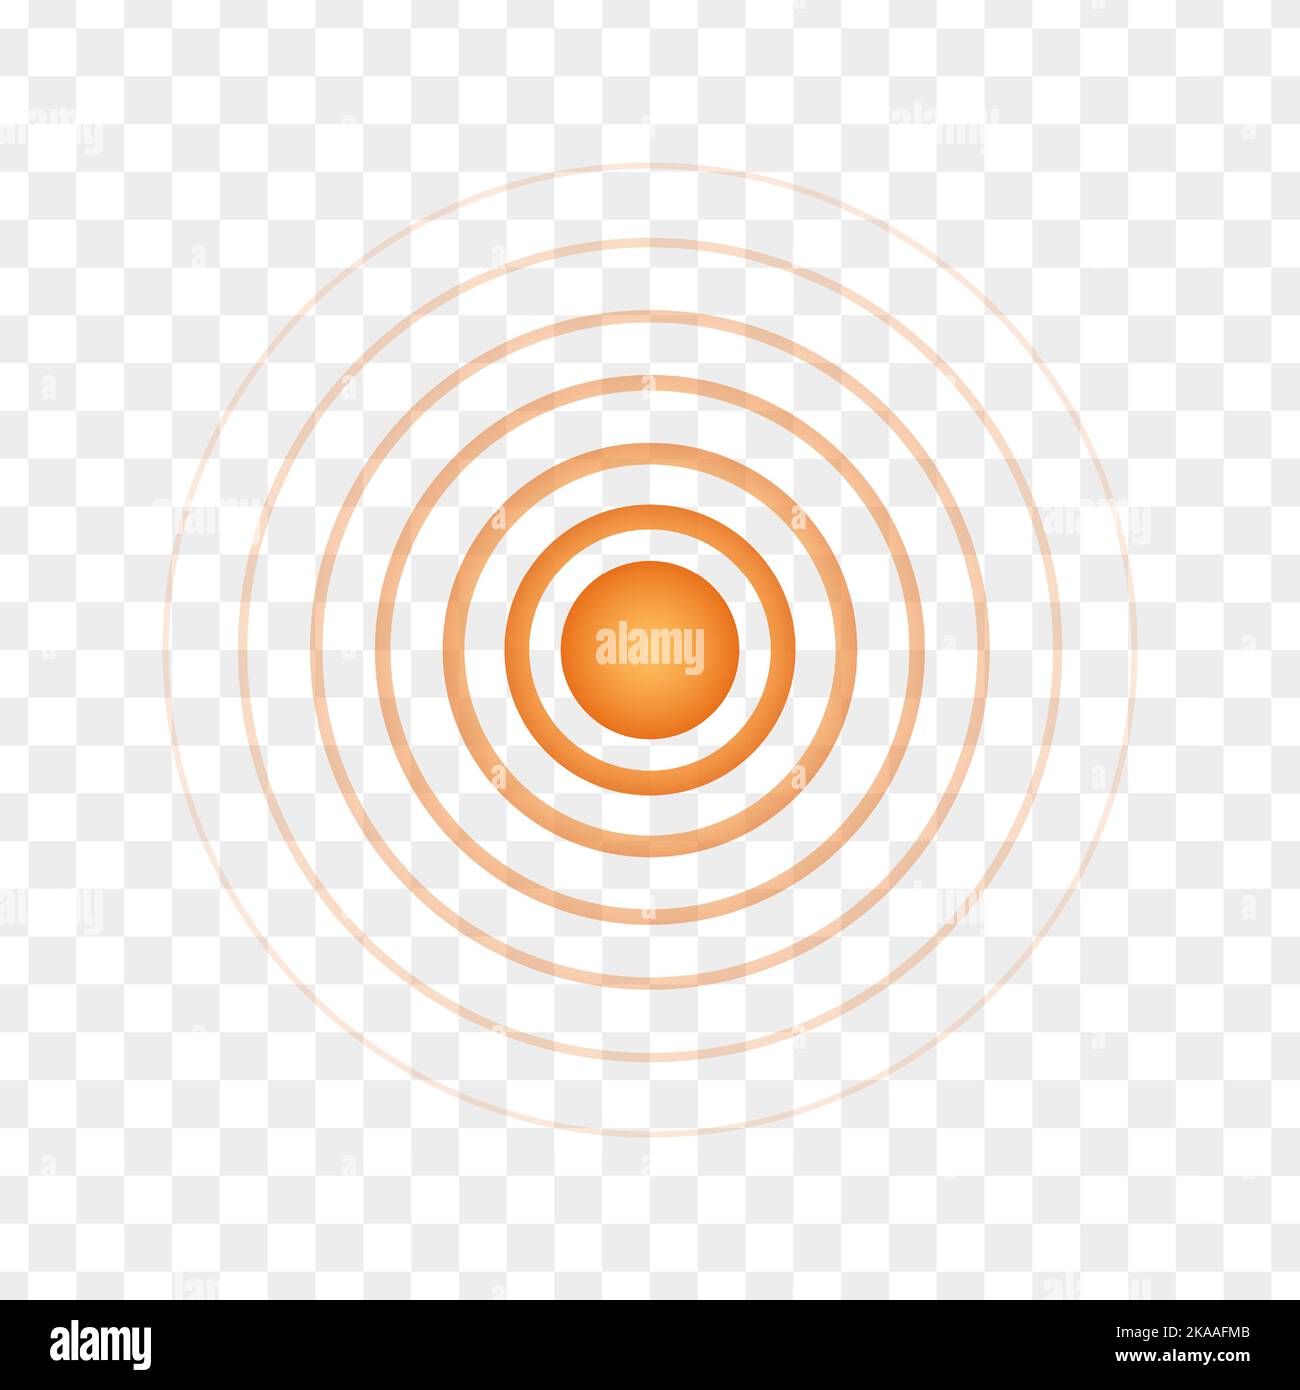 Orange concentric point. Round localization icon. Symbol of aim, target, pain, healing, hurt, painkilling. Radar, sound or sonar wave sign on transparent background. Vector illustration Stock Vector